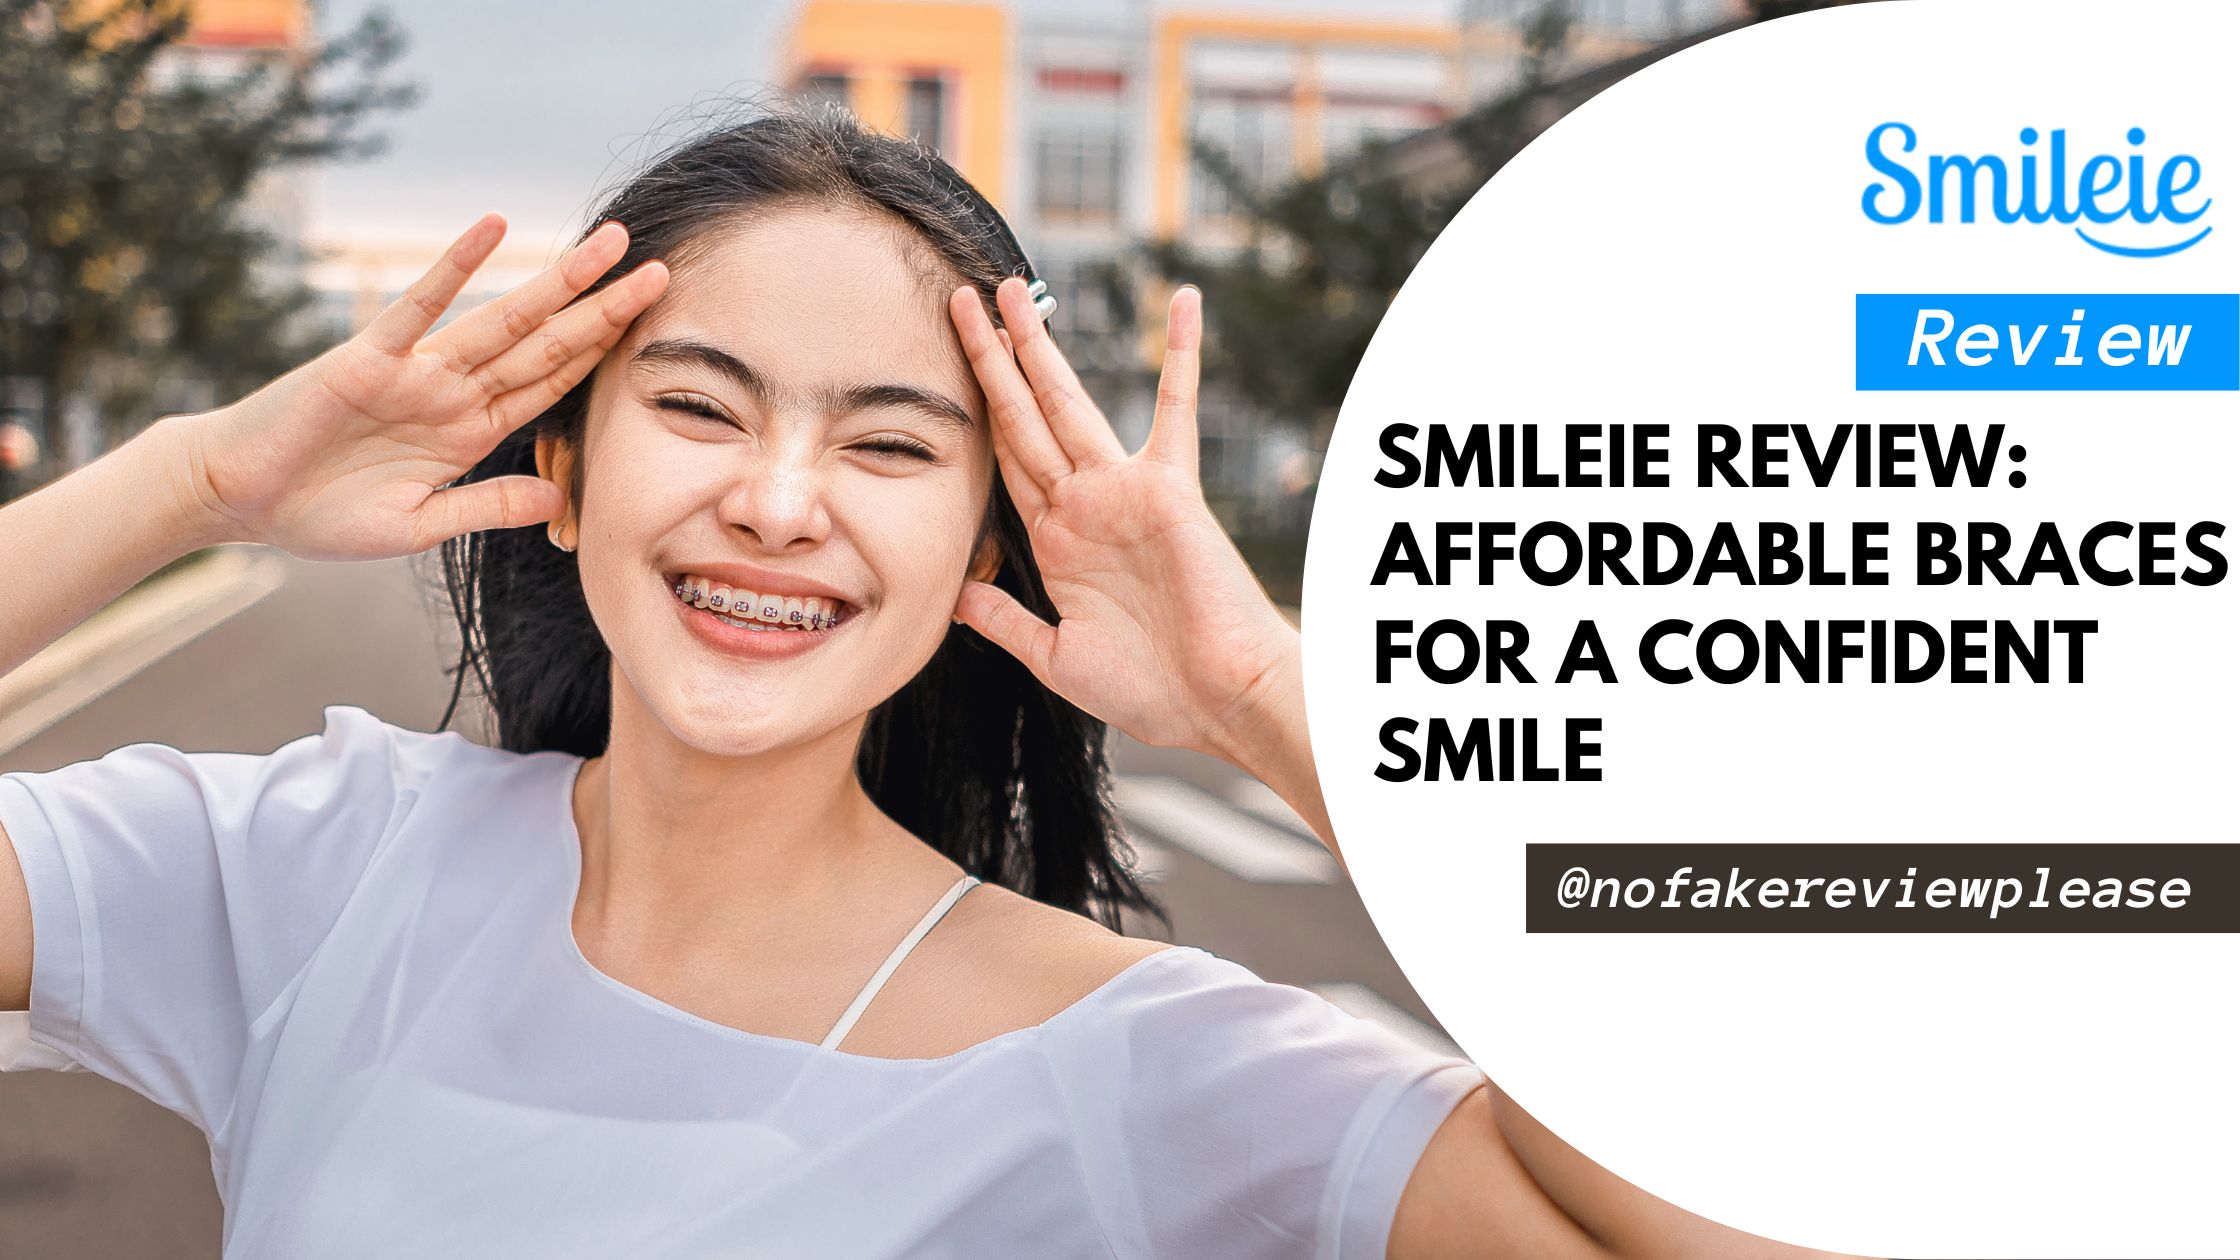 Smileie Review: Affordable Clear Braces for a Confident Smile